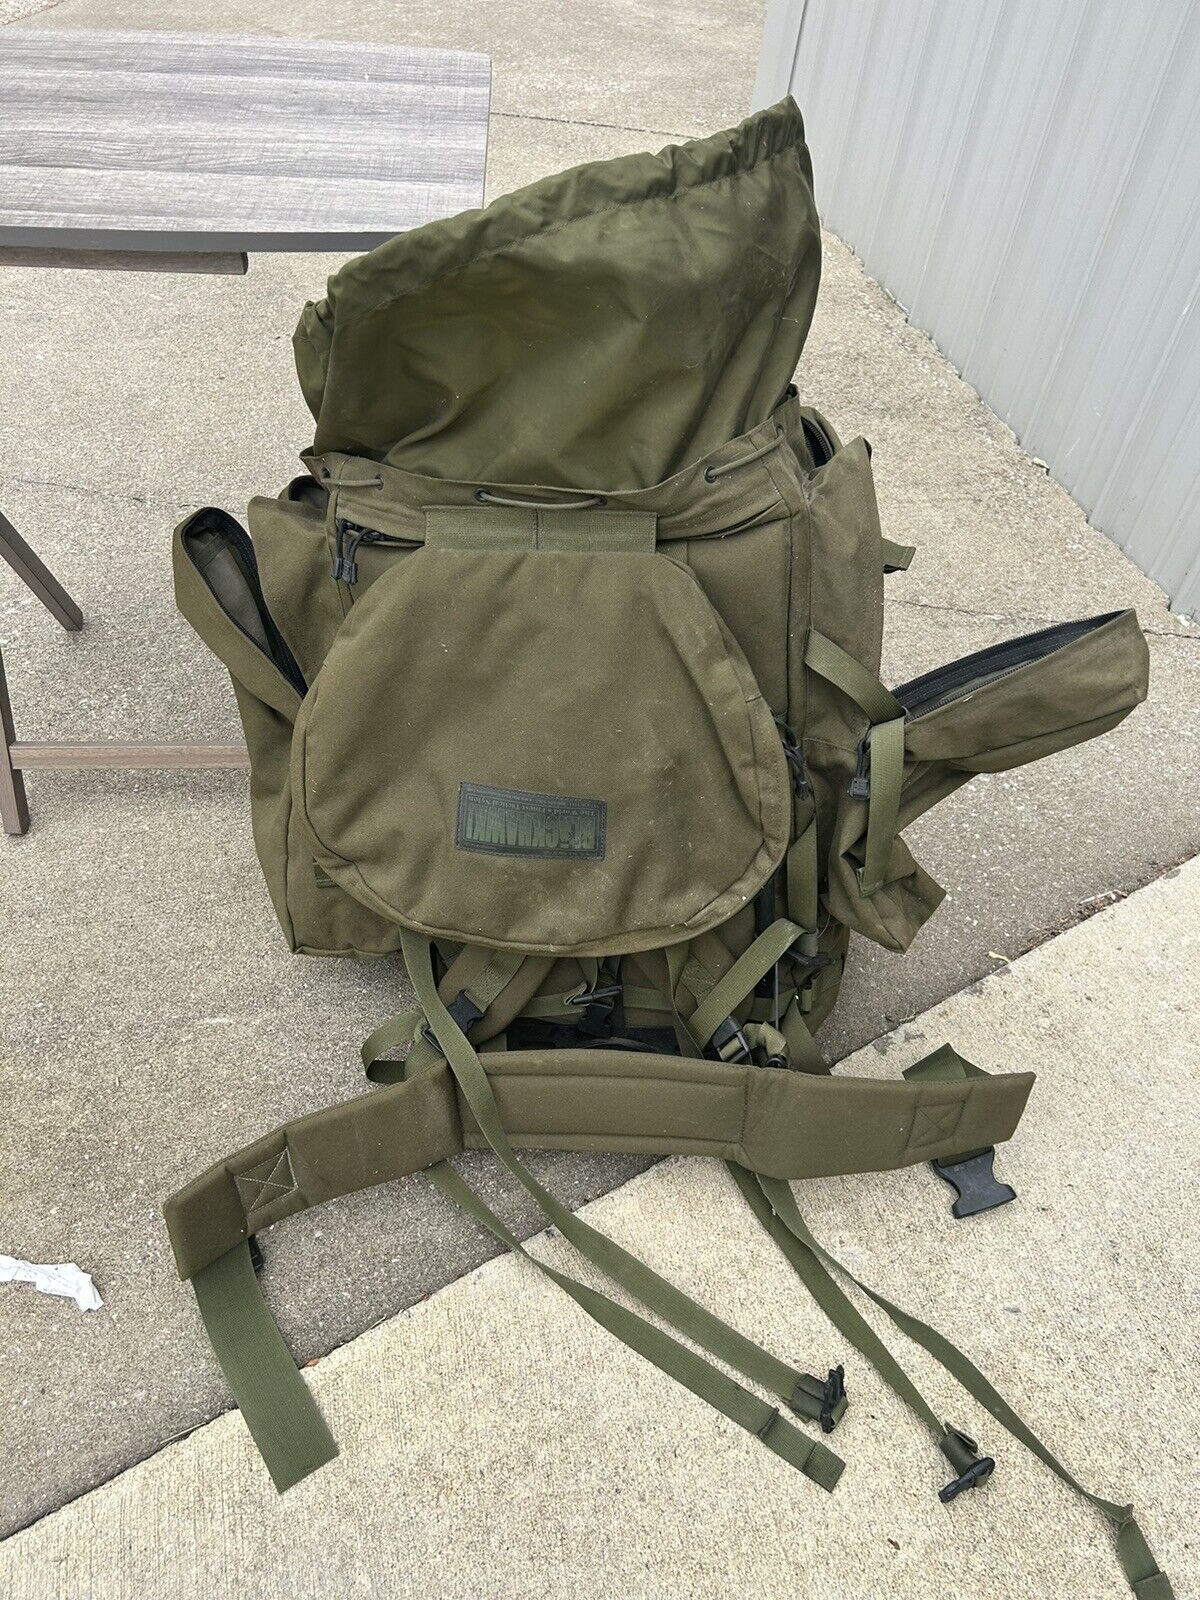 Authentic Blackhawk Military Issued Backpack